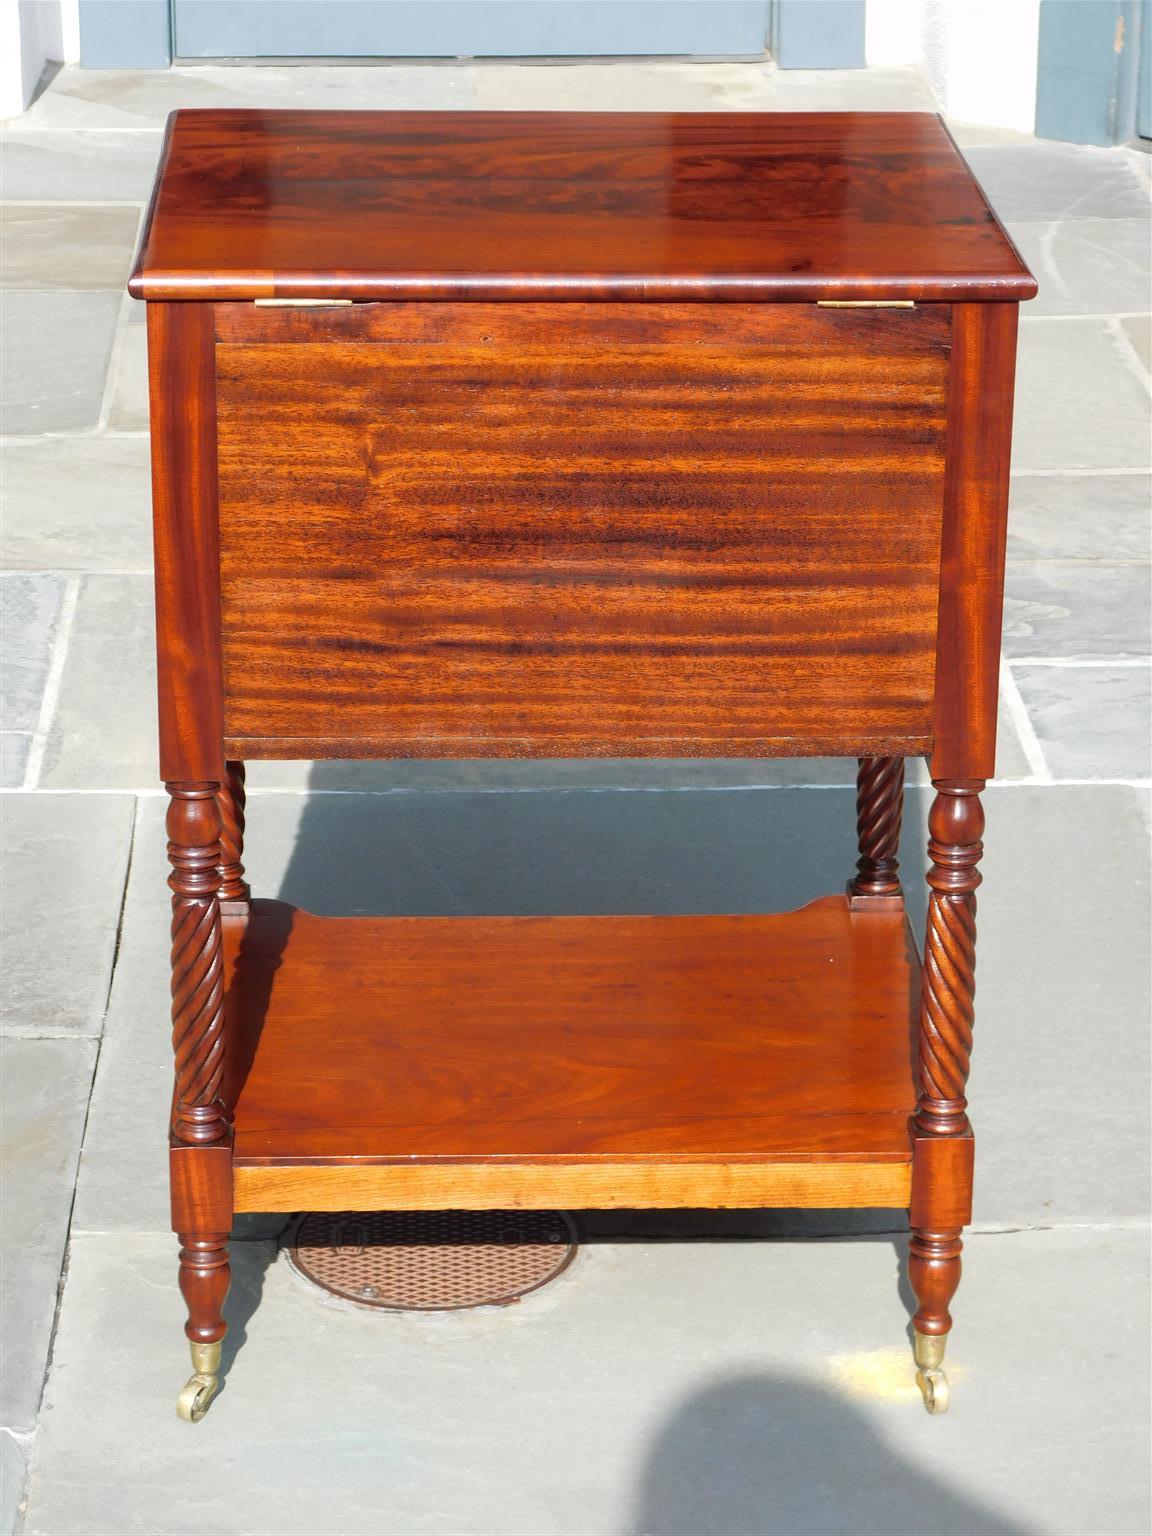 American Mahogany Federal Work Table with Barley Twist Legs on Casters, C. 1810 For Sale 7